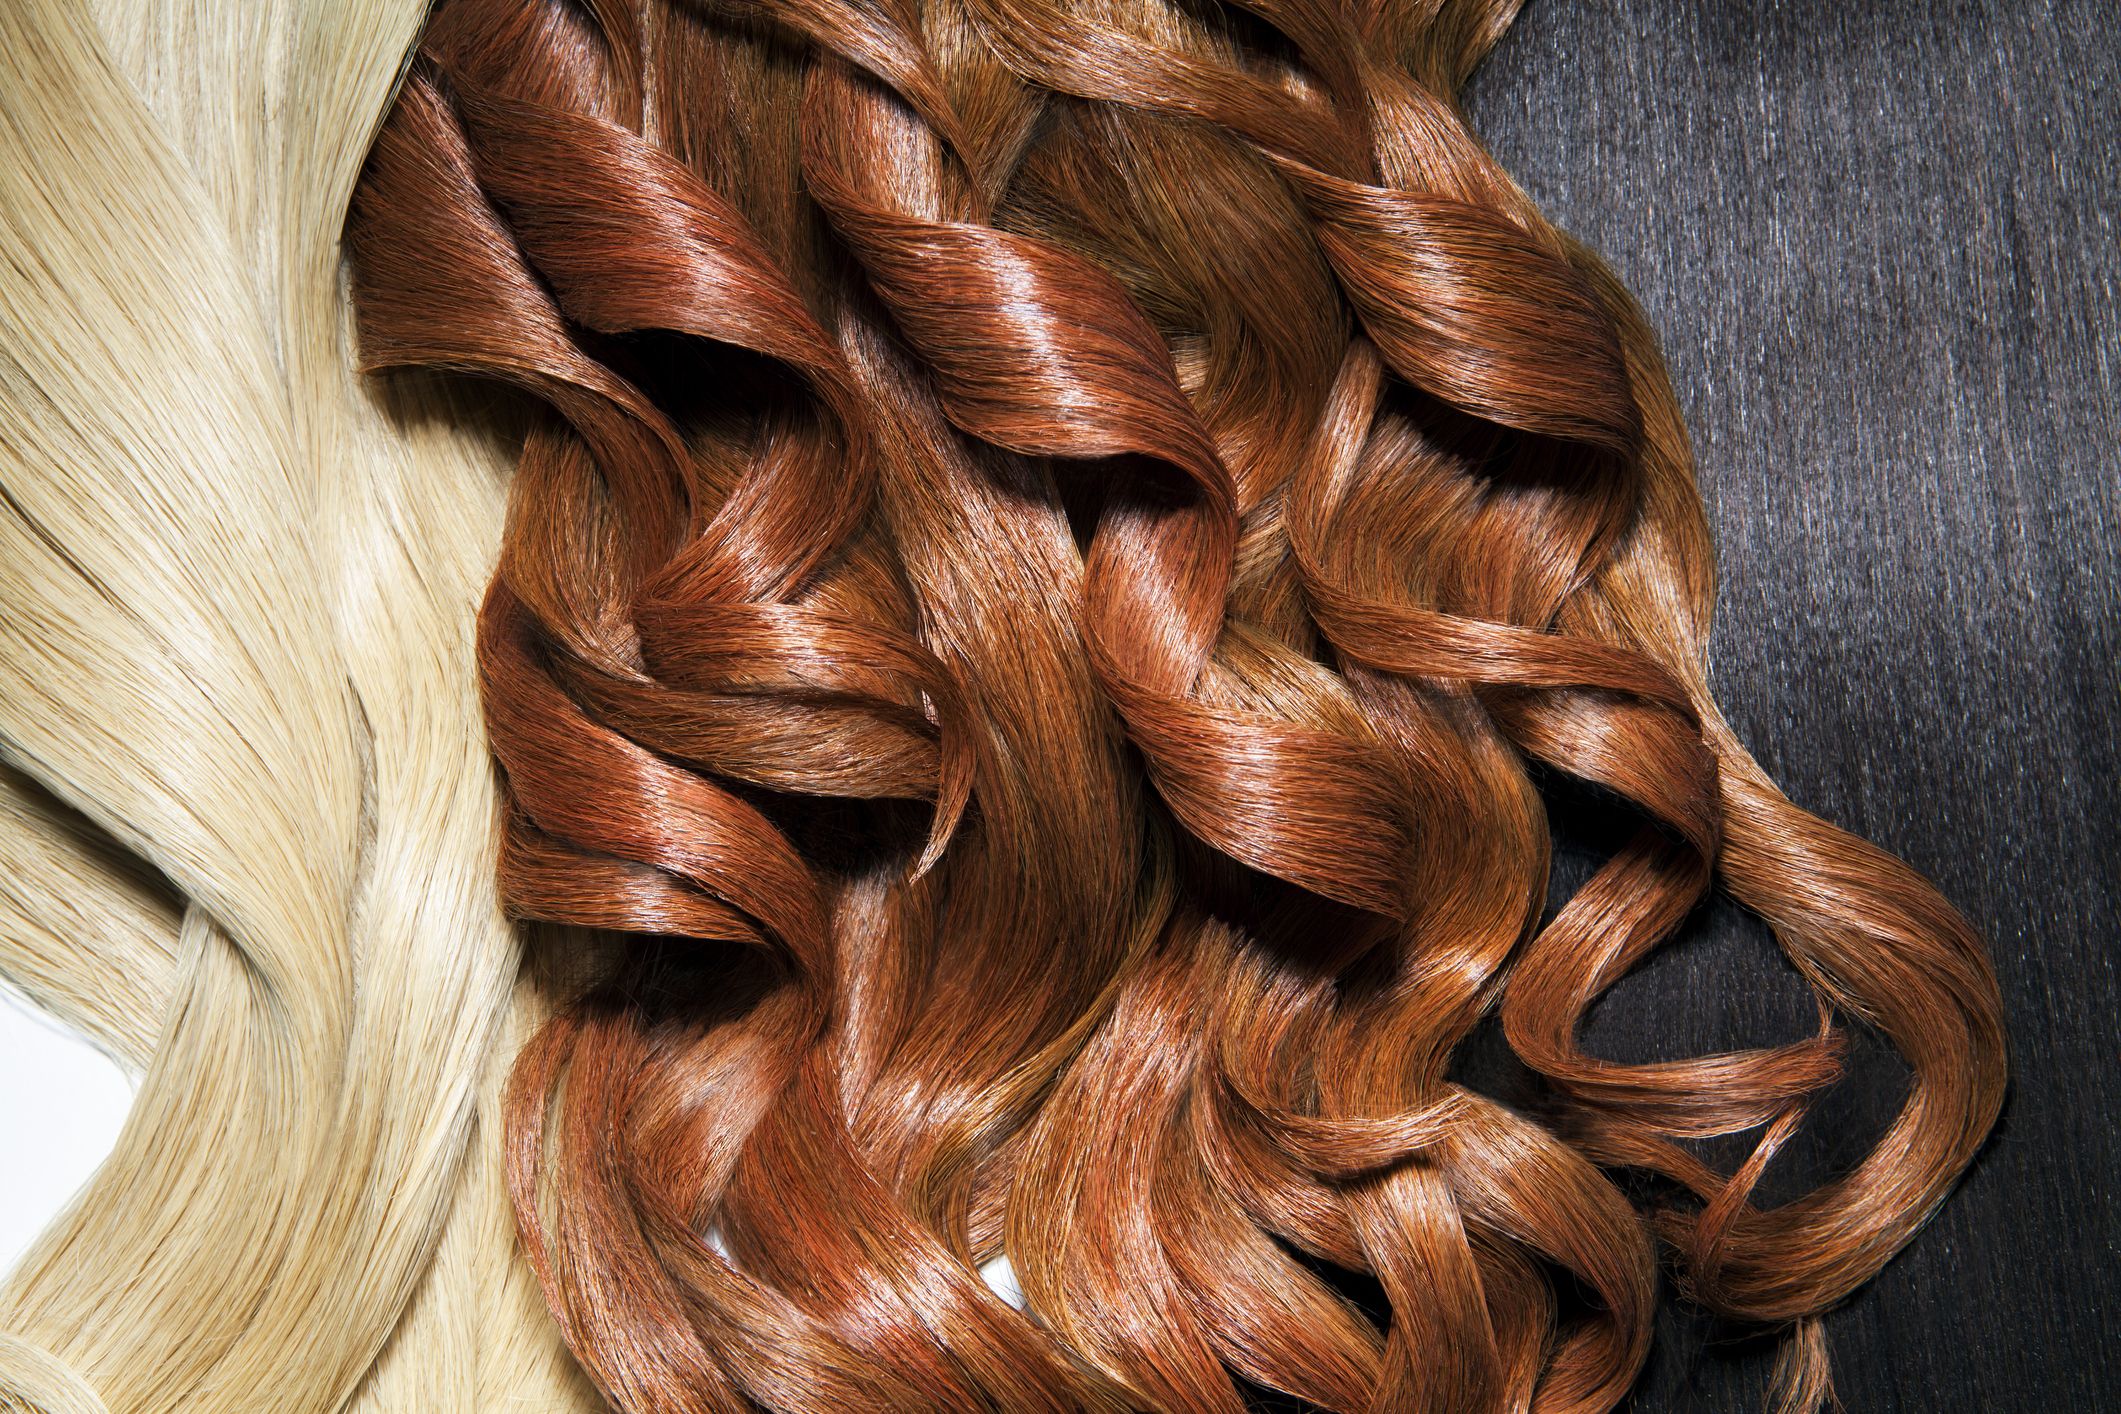 How to Treat Menopause Hair Changes, Loss, and Thinning